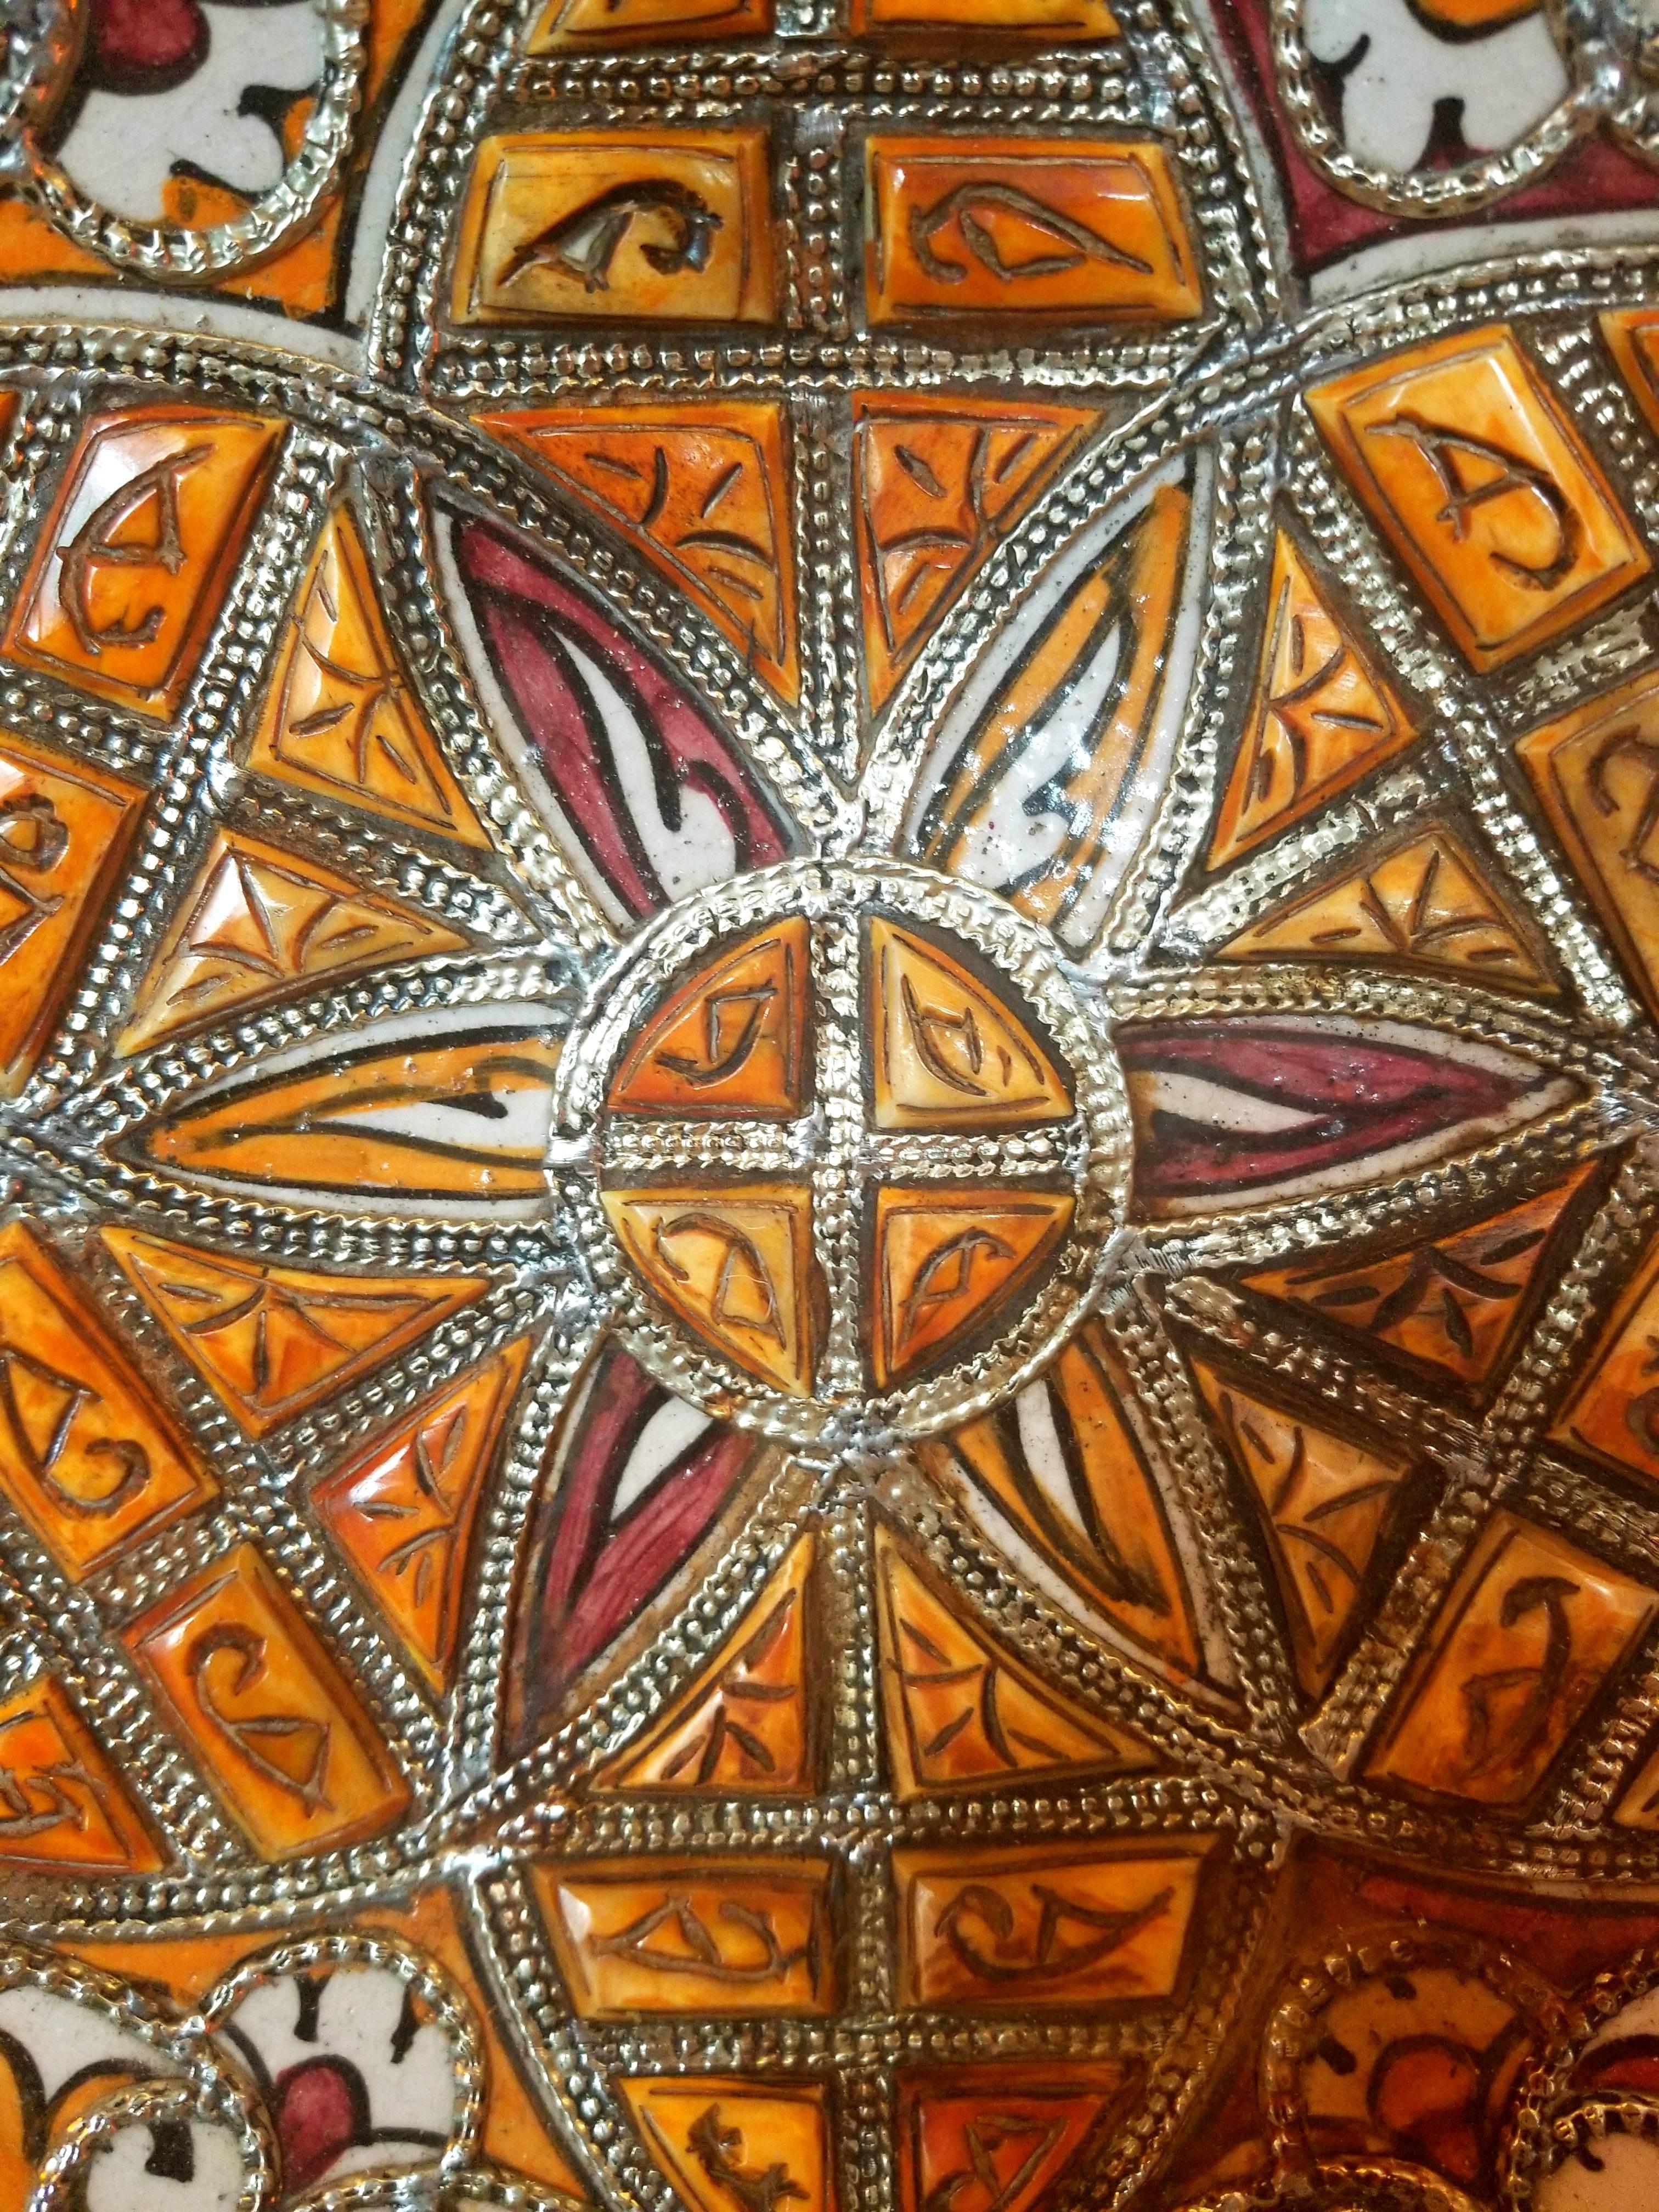 Metal and Camel Bone Inlaid Moroccan Hand-Painted Plate, Multi-Color In Excellent Condition For Sale In Orlando, FL